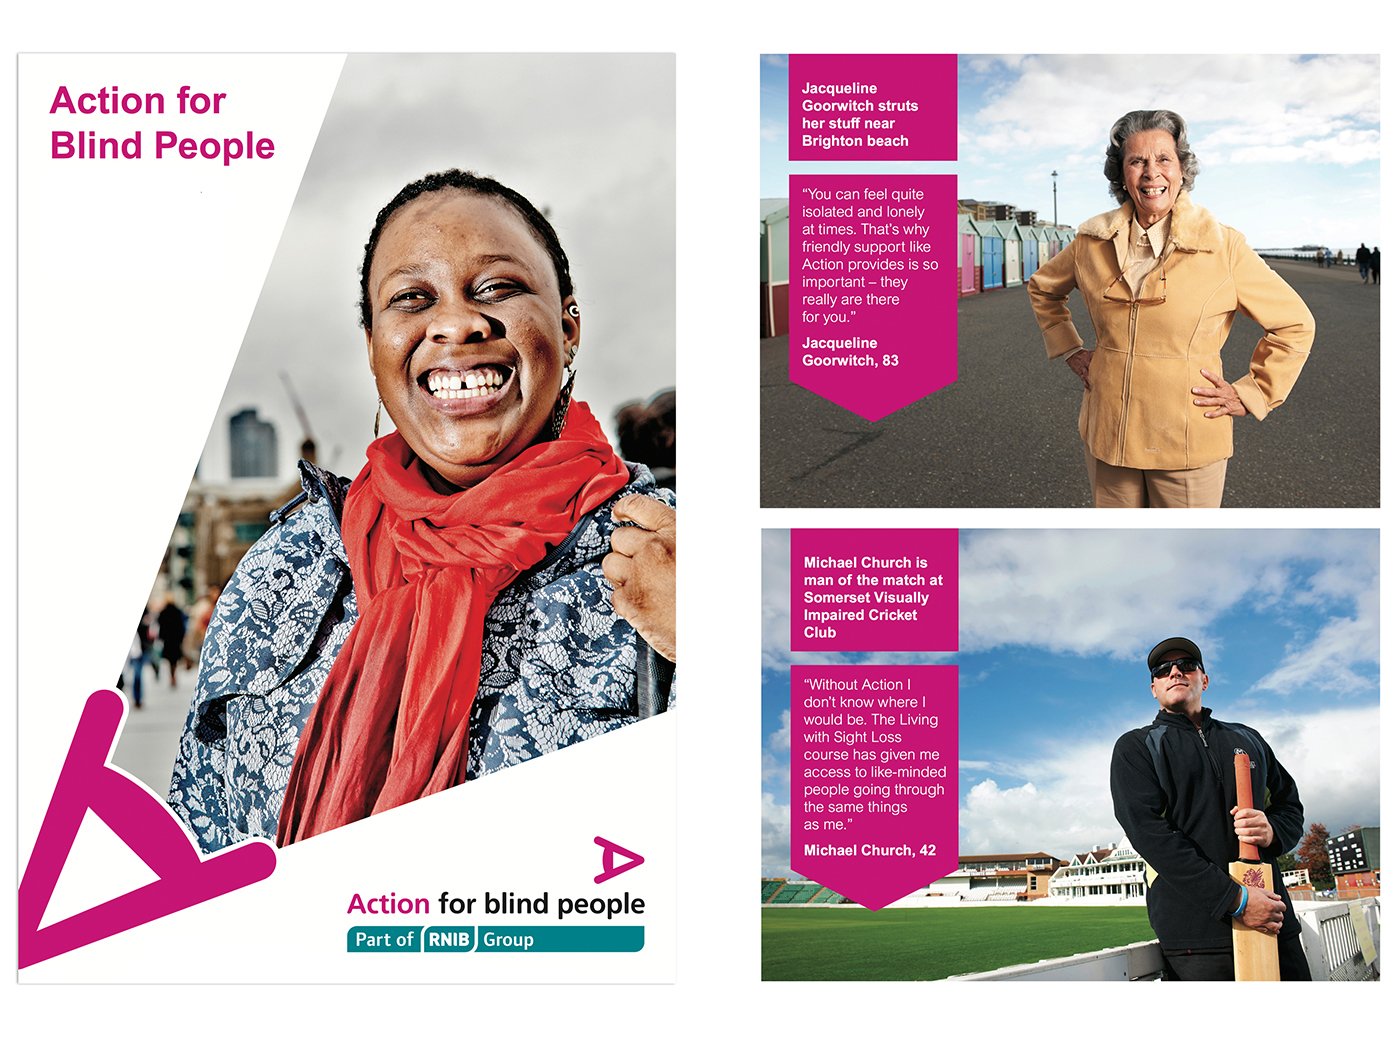 RNIB - Action for Blind People